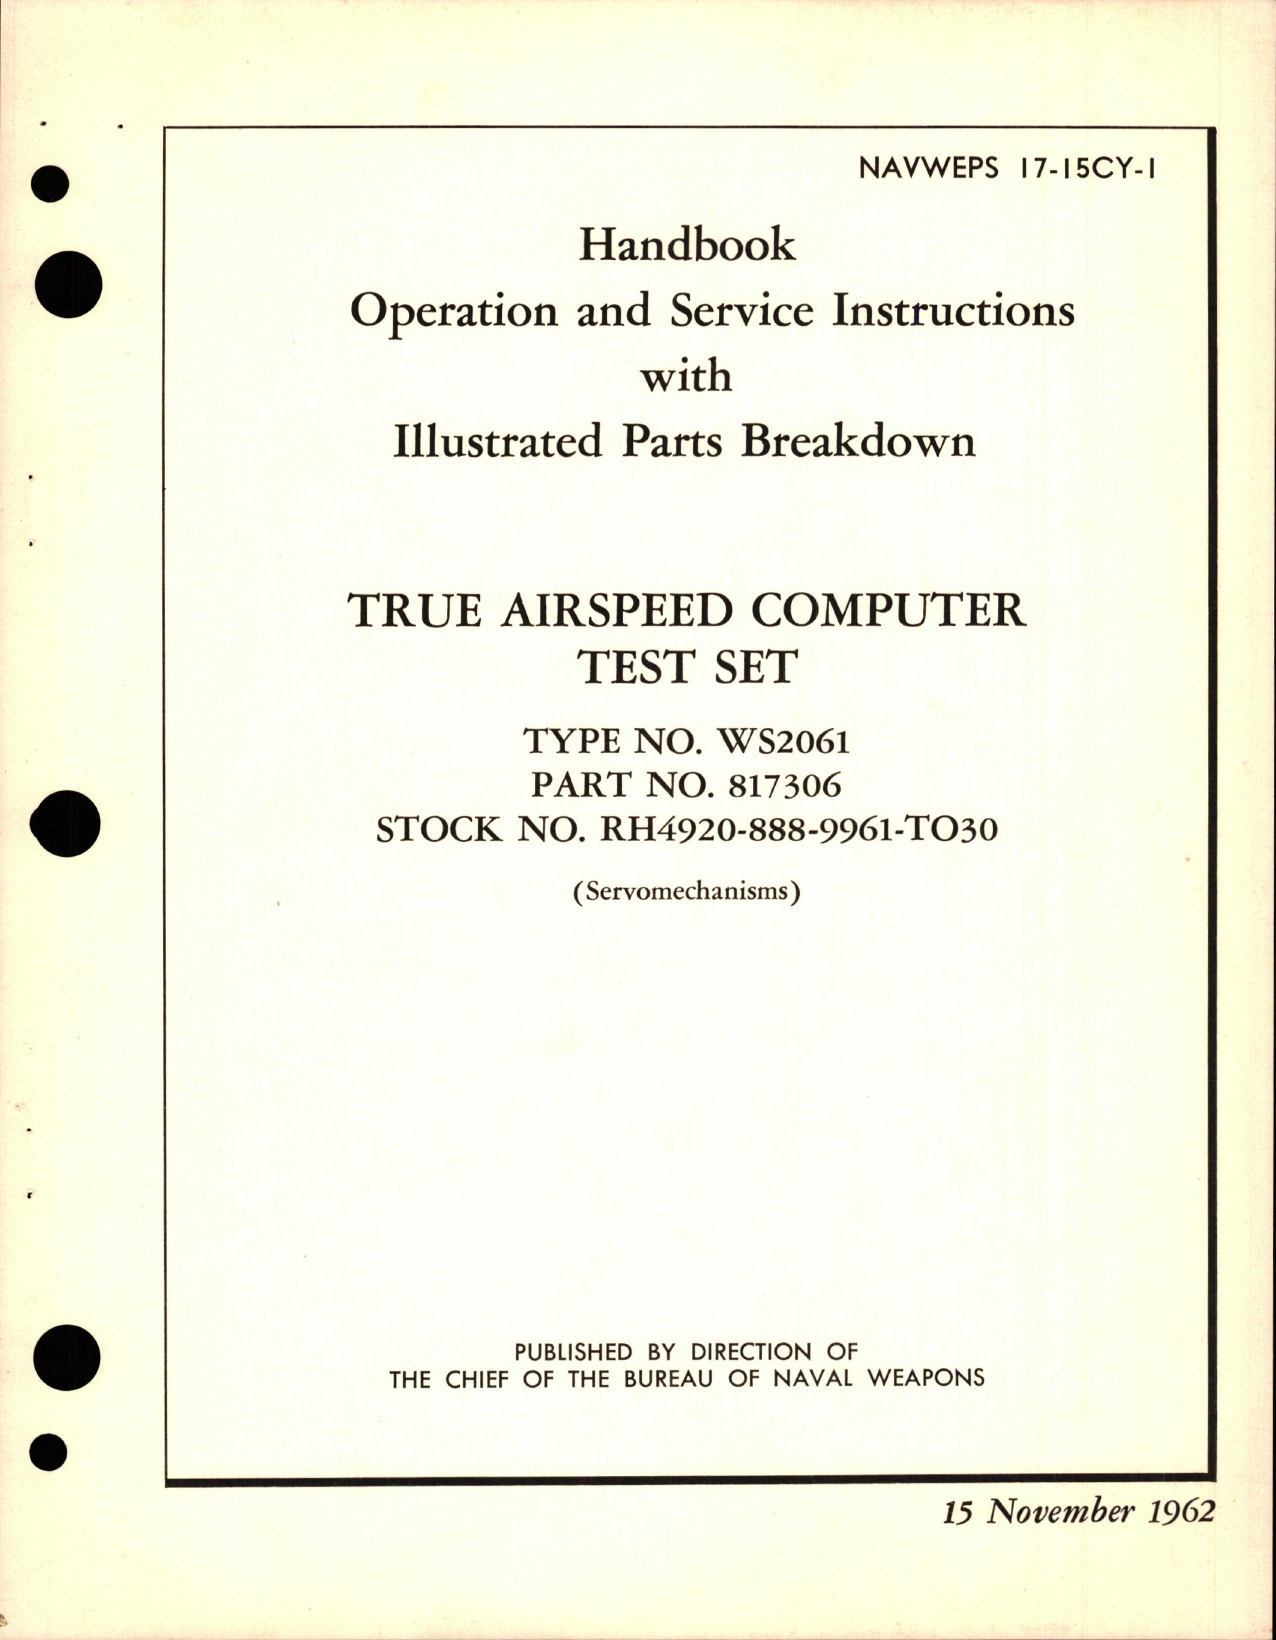 Sample page 1 from AirCorps Library document: Operation, Service Instructions and Illustrated Parts Breakdown for True Airspeed Computer Test Set - Type WS2061 - Part 817306